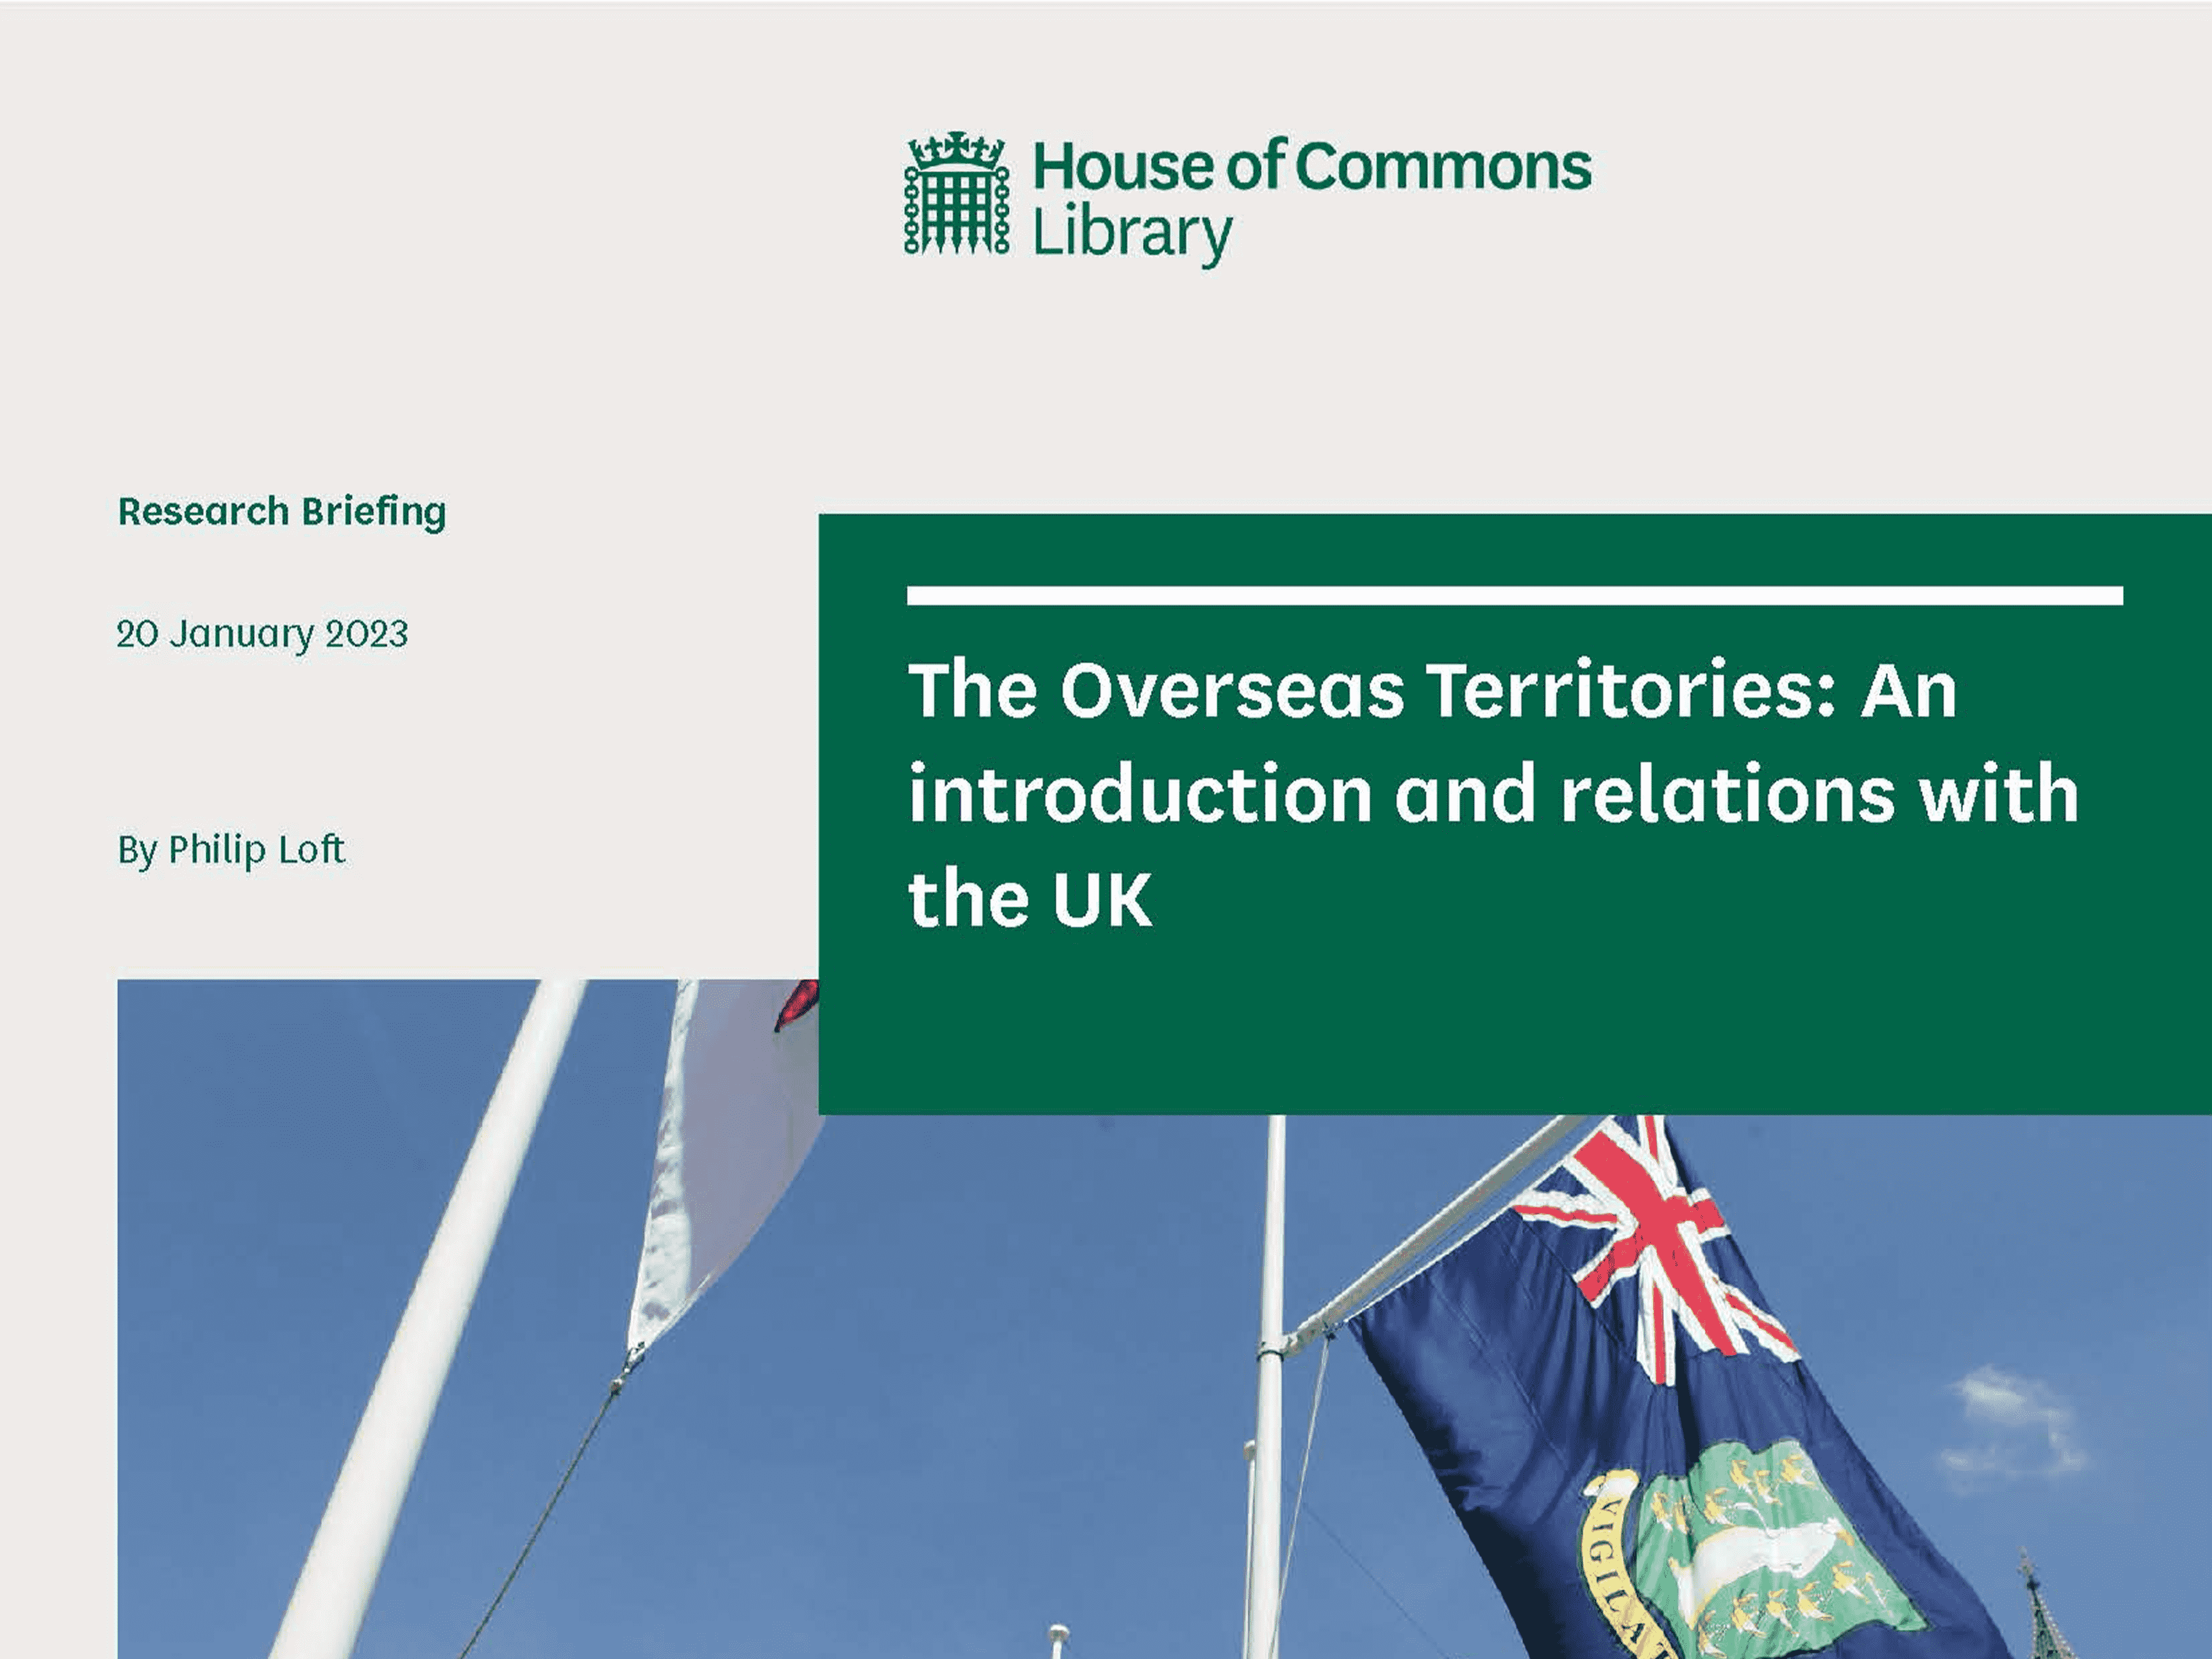 The Overseas Territories: An introduction and relations with the UK